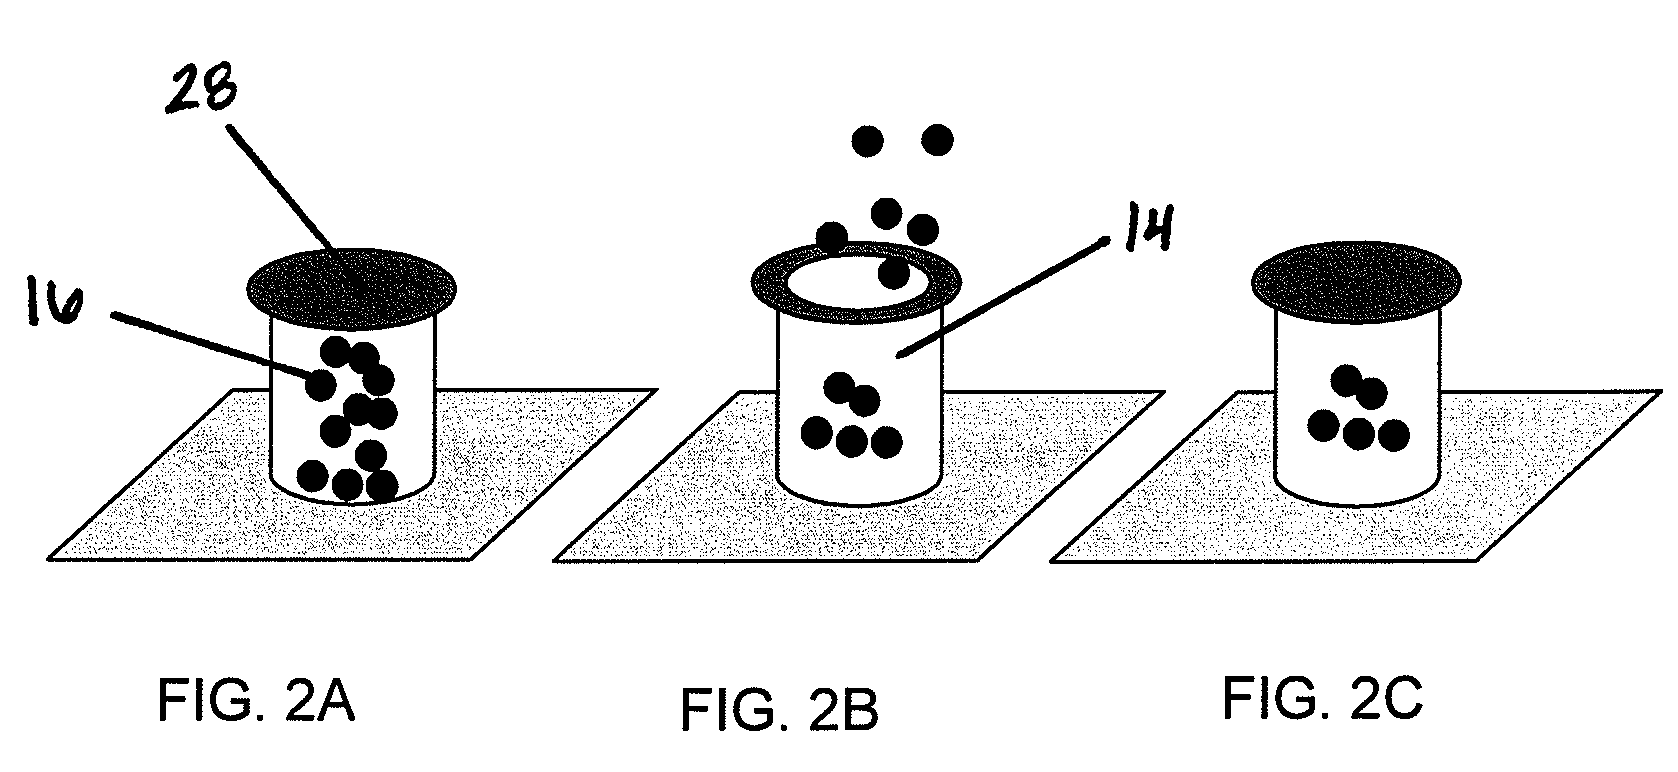 Apparatus and method of retaining and releasing molecules from nanostructures by an external stimulus